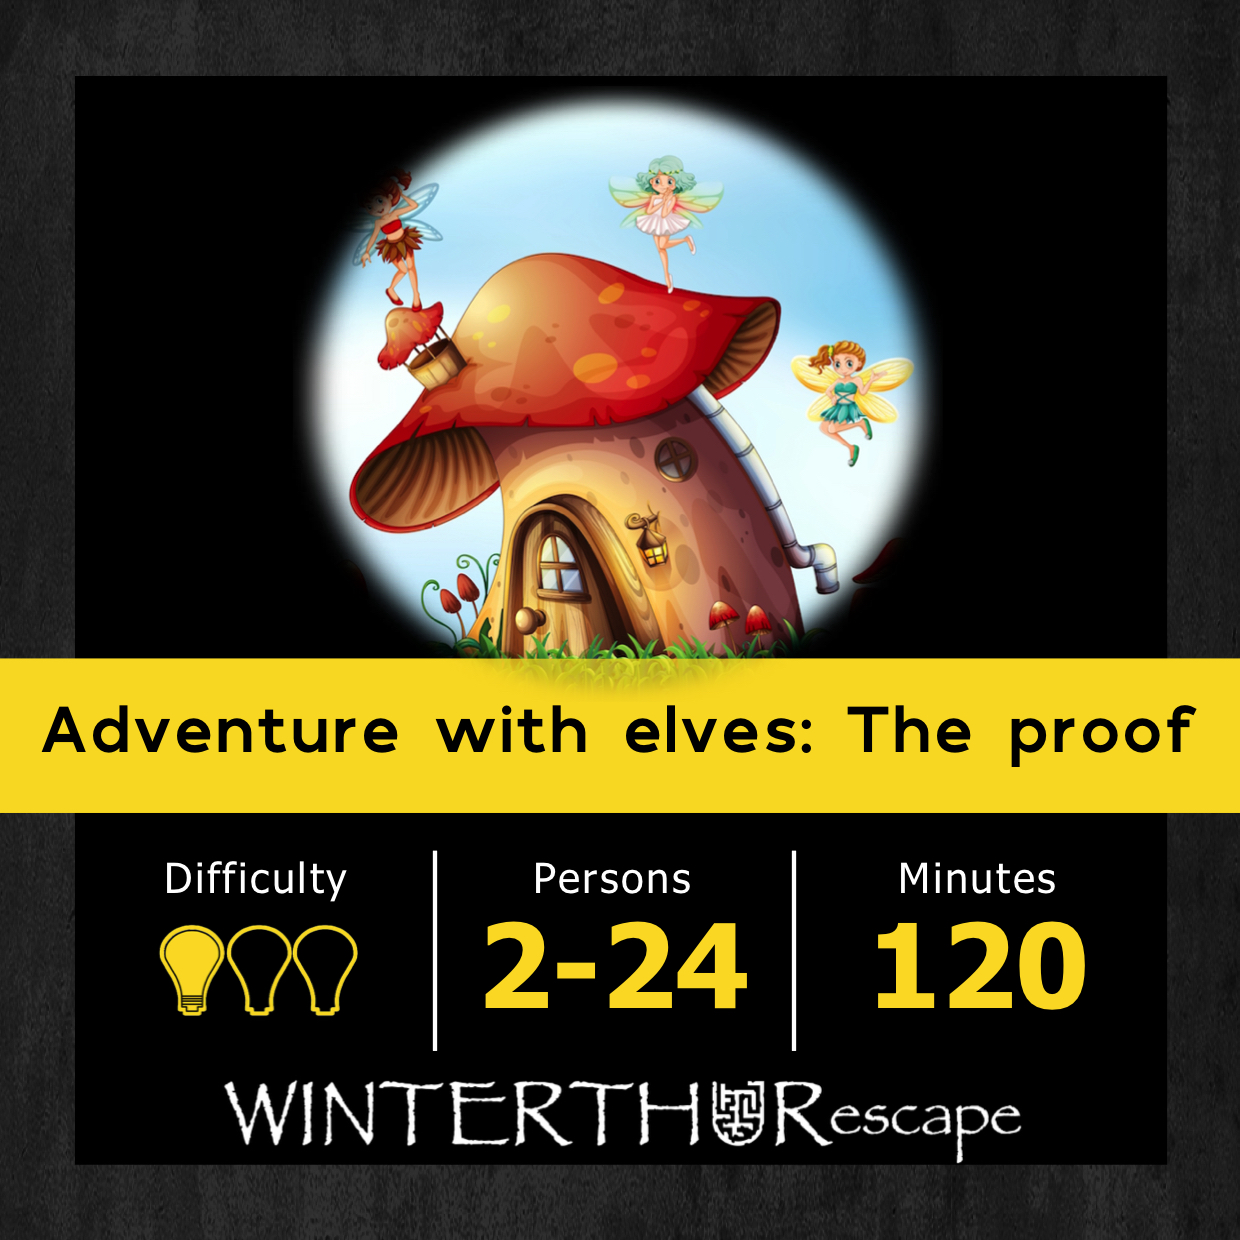 Adventure with elves: the proof Winterthuralbisrieden, foxtrail children Winterthuralbisrieden, foxtrail familie Winterthuralbisrieden, escape game children Winterthuralbisrieden, outdoor escape game children Winterthuralbisrieden, outdoor escape room children Winterthuralbisrieden, schnitzeljagd children Winterthuralbisrieden, schatzsuche children Winterthuralbisrieden, urbanmission children Winterthuralbisrieden, city game children Winterthuralbisrieden, treasure hunt children Winterthuralbisrieden, scavenger game children Winterthuralbisrieden, outdoor spiel children Winterthuralbisrieden, outdoor game children Winterthuralbisrieden, escape mission children Winterthuralbisrieden, outdoor escape mission children Winterthuralbisrieden, escape game familie Winterthuralbisrieden, outdoor escape game familie Winterthuralbisrieden, outdoor escape room familie Winterthuralbisrieden, schnitzeljagd familie Winterthuralbisrieden, schatzsuche familie Winterthuralbisrieden, urbanmission familie Winterthuralbisrieden, city game familie Winterthuralbisrieden, treasure hunt familie Winterthuralbisrieden, scavenger game familie Winterthuralbisrieden, outdoor spiel familie Winterthuralbisrieden, outdoor game familie Winterthuralbisrieden, escape mission familie Winterthuralbisrieden, outdoor escape mission familie Winterthuralbisrieden